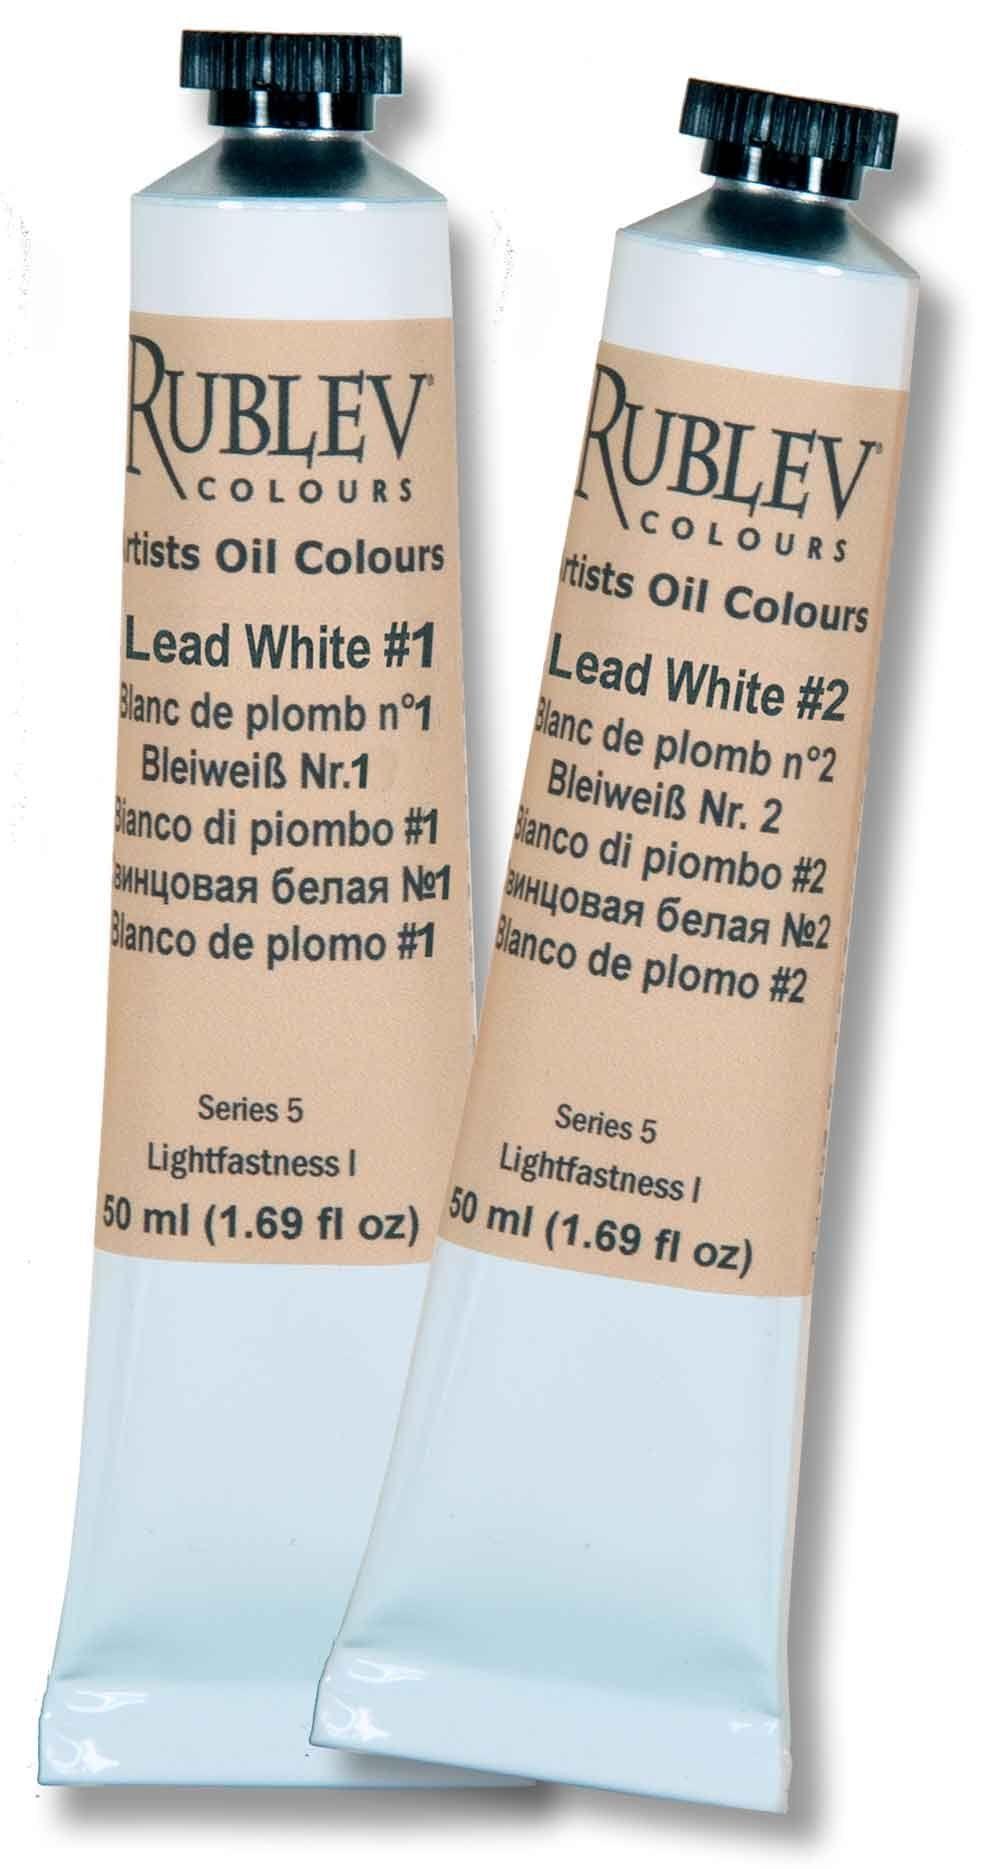 What Whites are Best for Your Oil Painting?